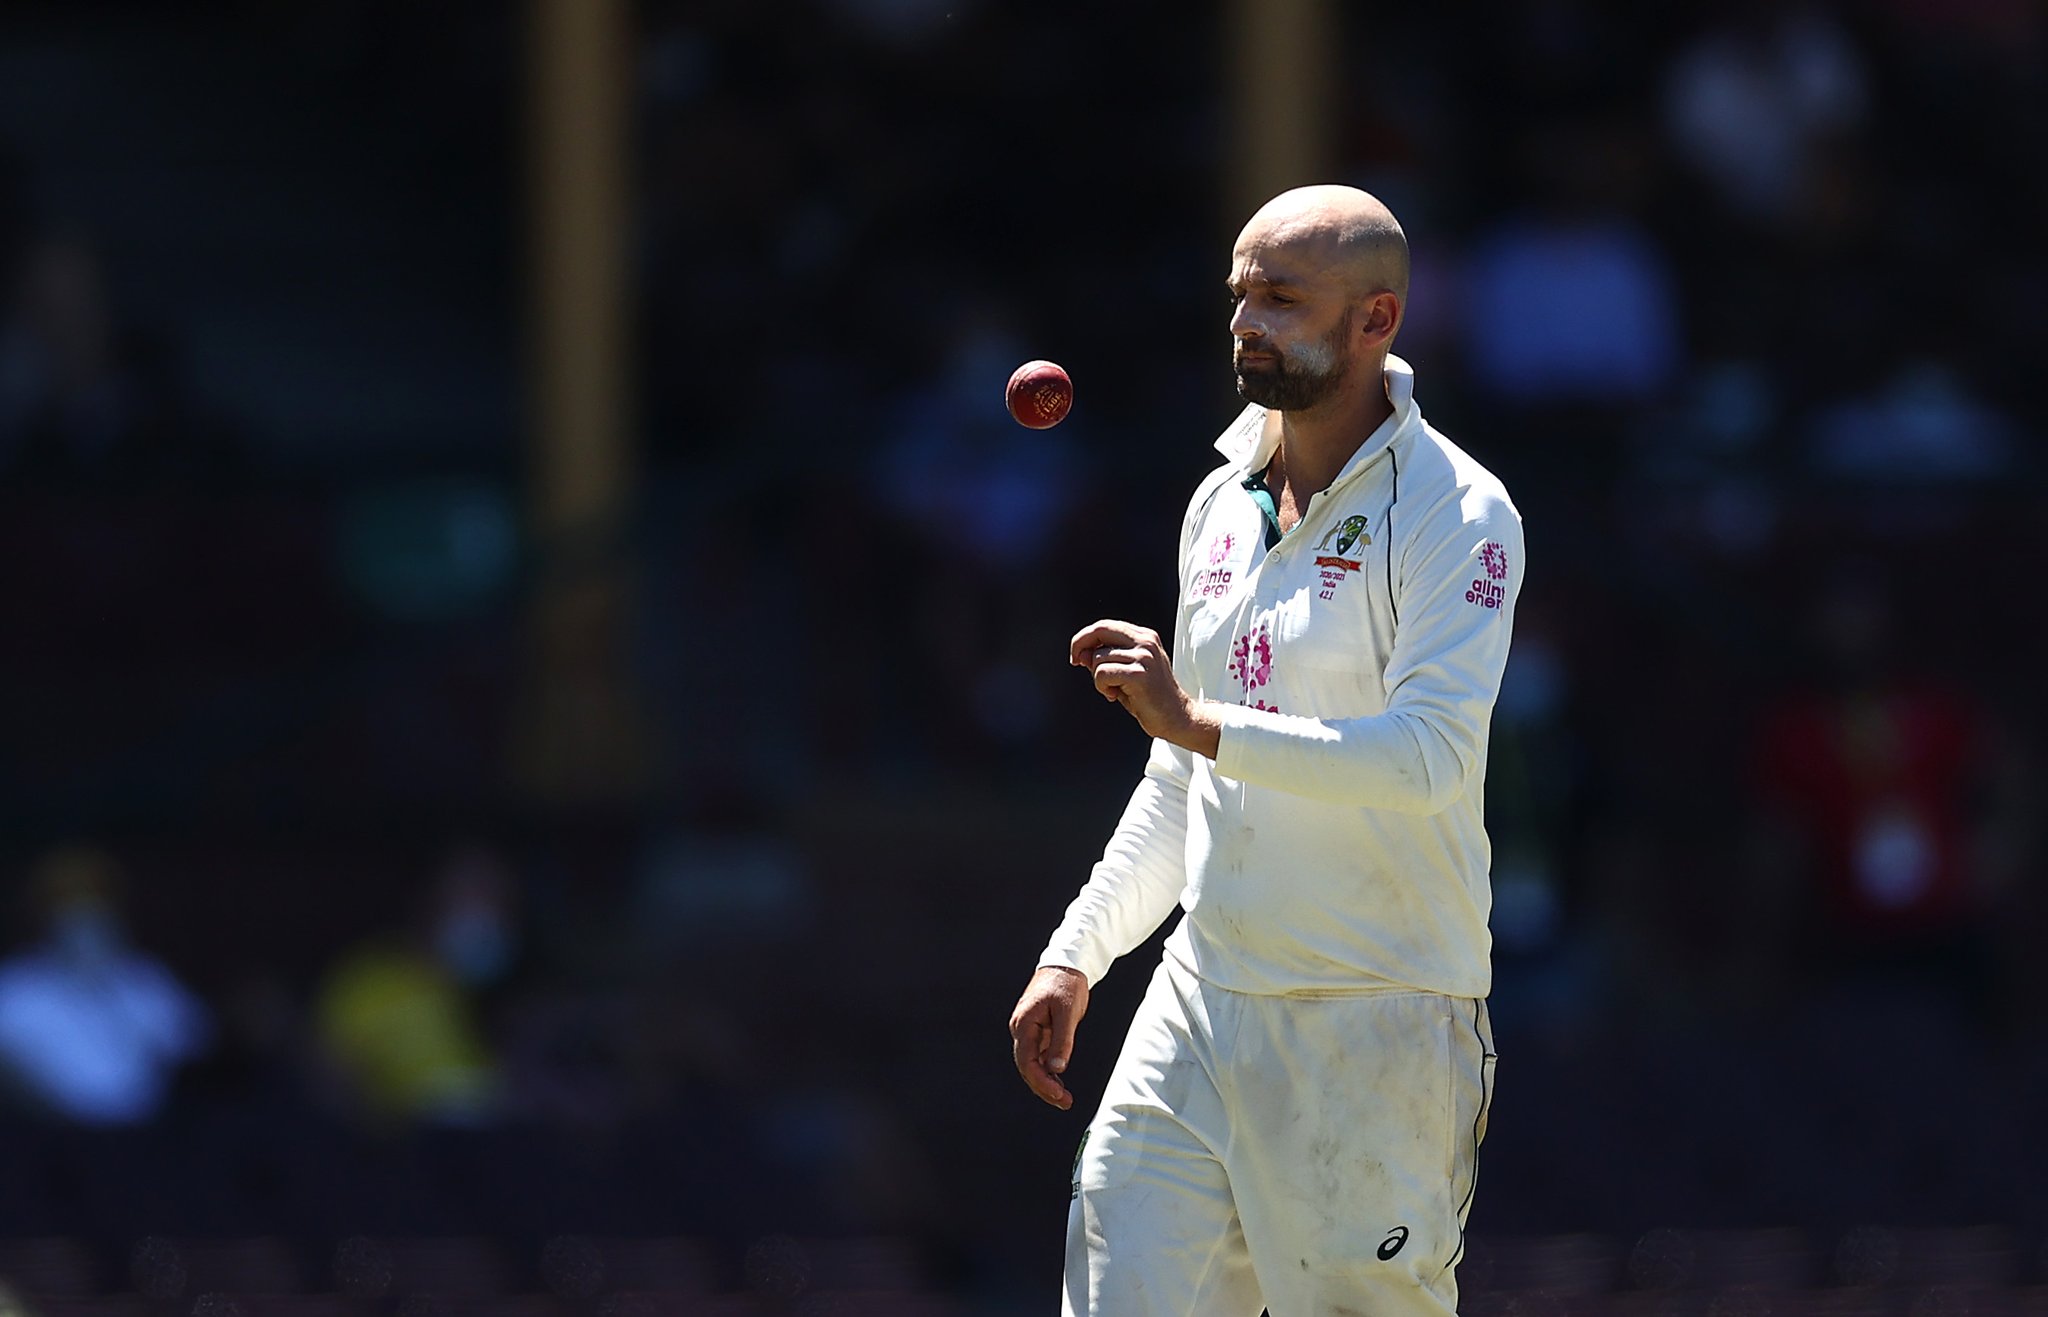 'There is No Line in the Sand': Nathan Lyon on His Future